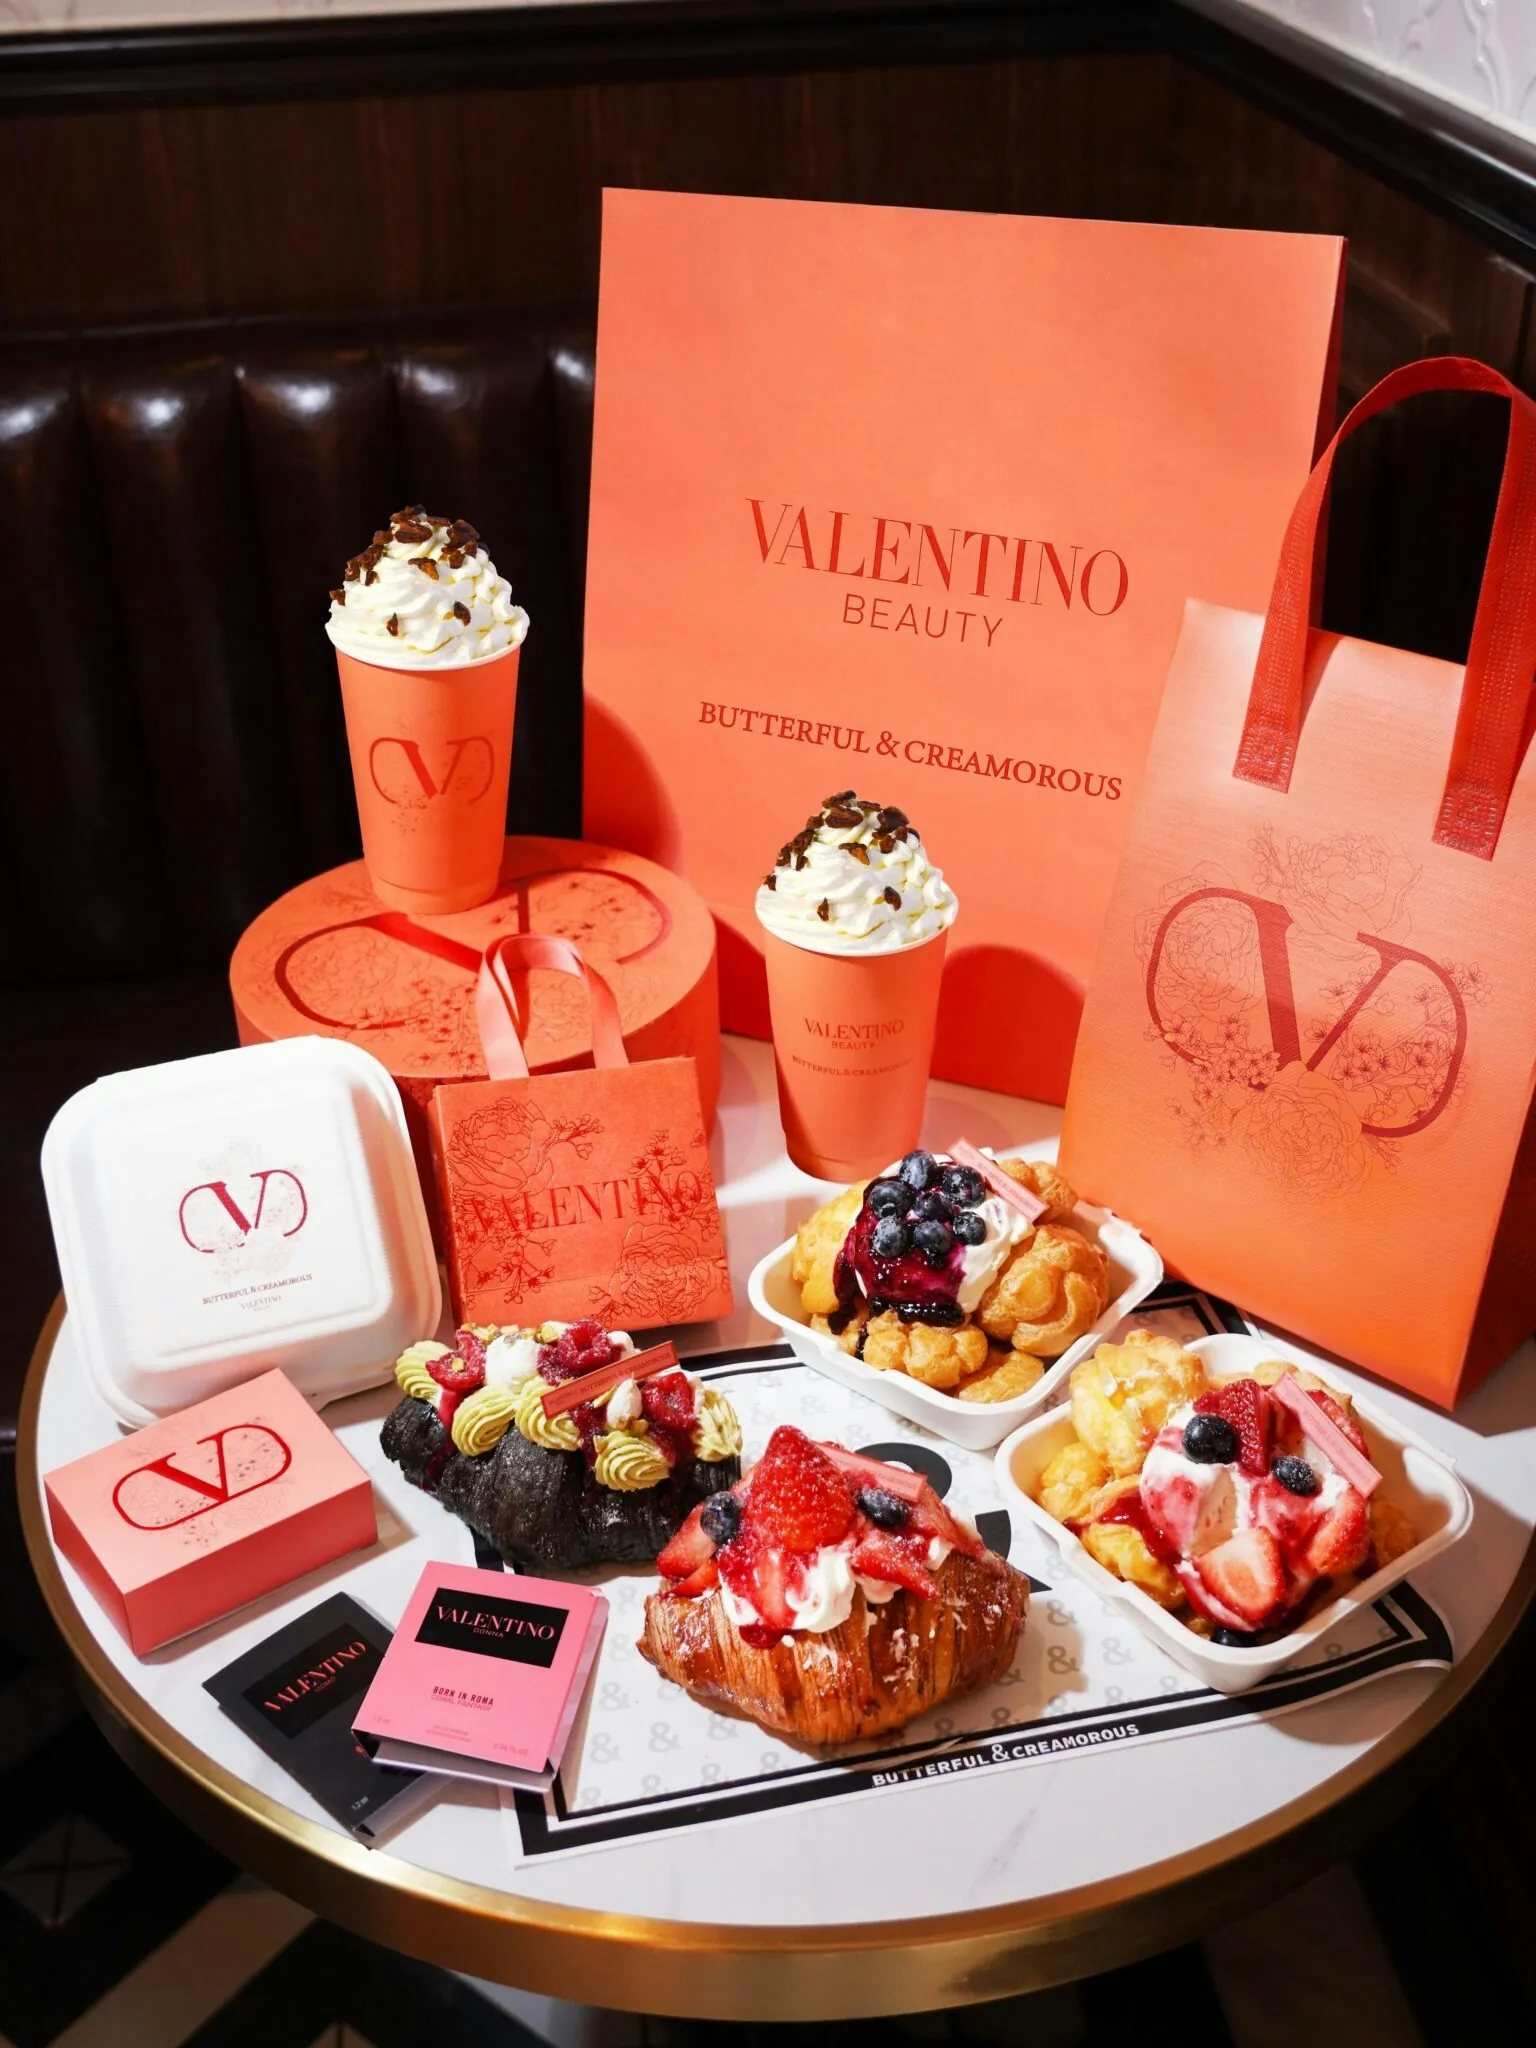 Valentino Beauty teamed up with popular chain Butterful & Creamorous to paint its Shanghai flagship spot orange earlier this year. Photo: Weibo